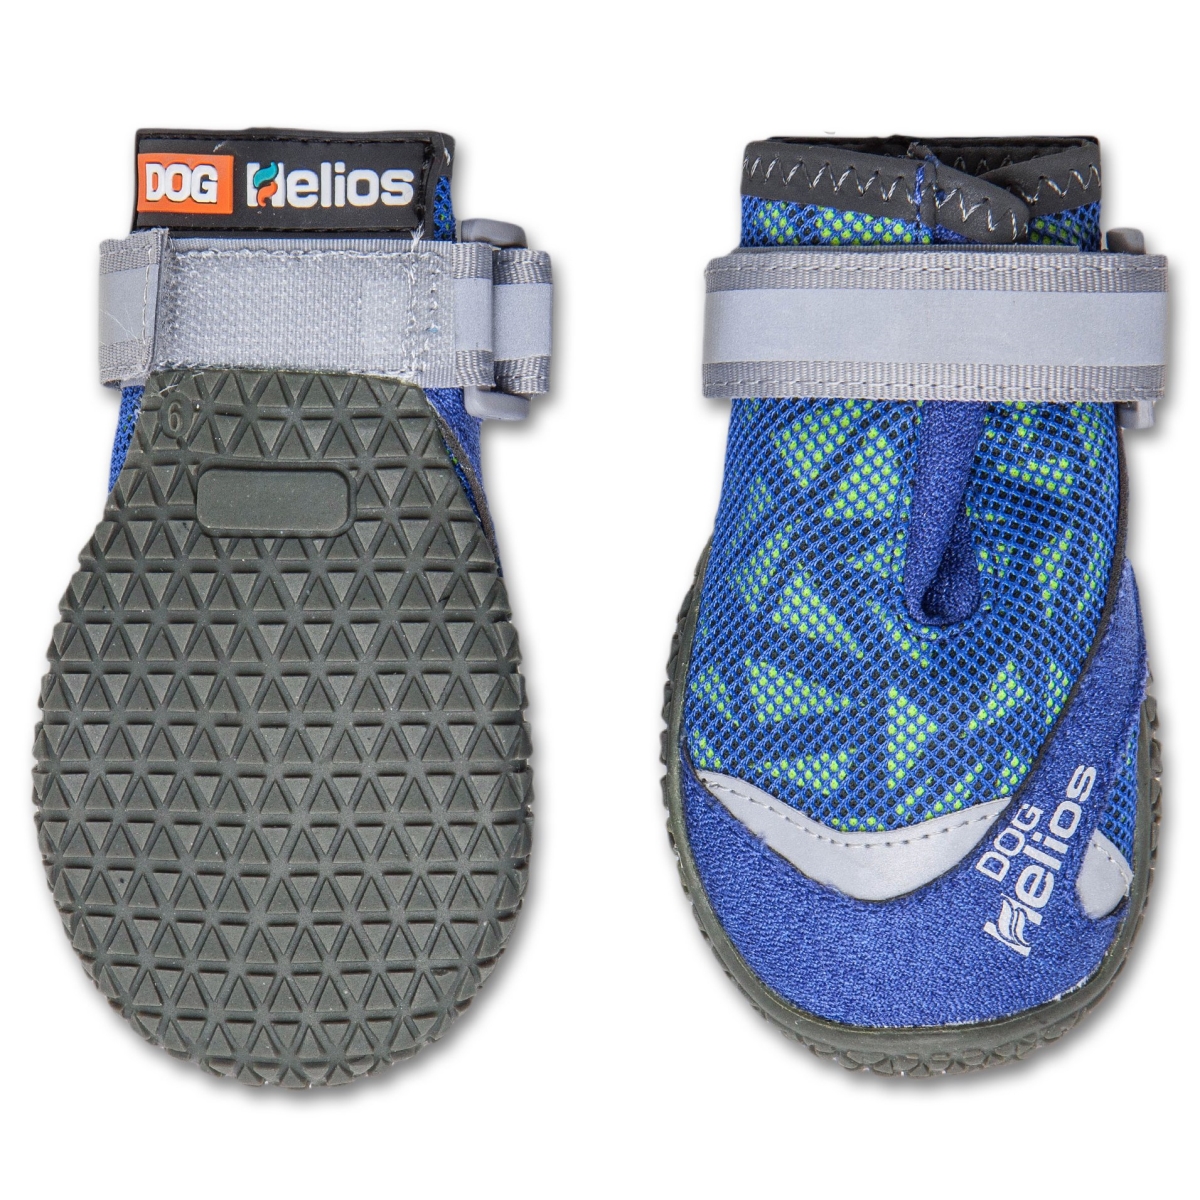 Picture of Dog Helios F17BLSM Surface Premium Grip Performance Dog Shoes - Blue - Small